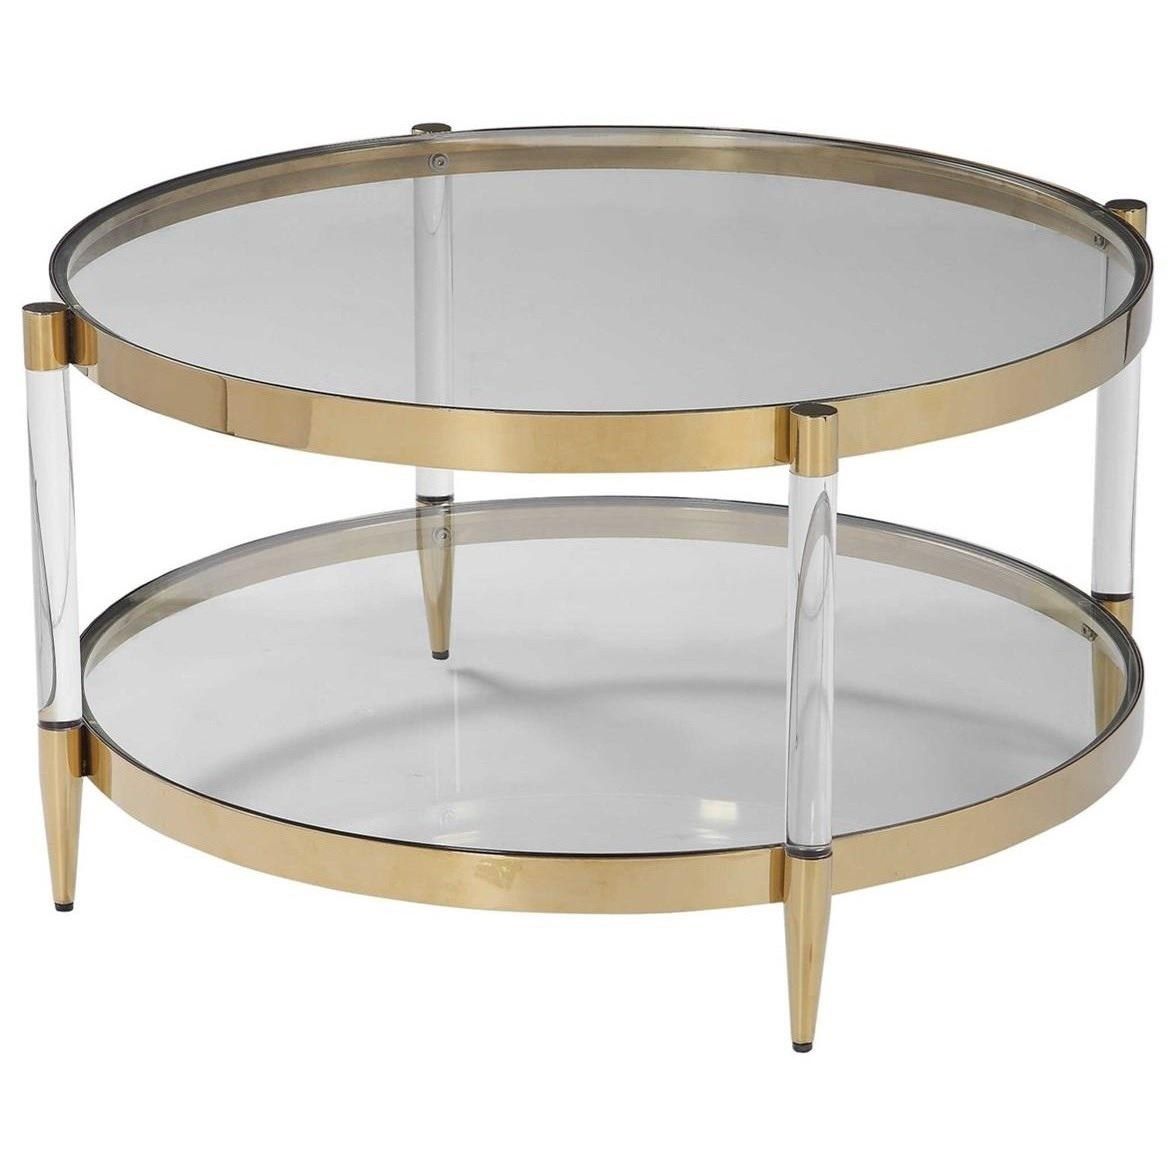 Uttermost Accent Furniture – Occasional Tables Kellen Glass Coffee Within Occasional Coffee Tables (Gallery 18 of 20)